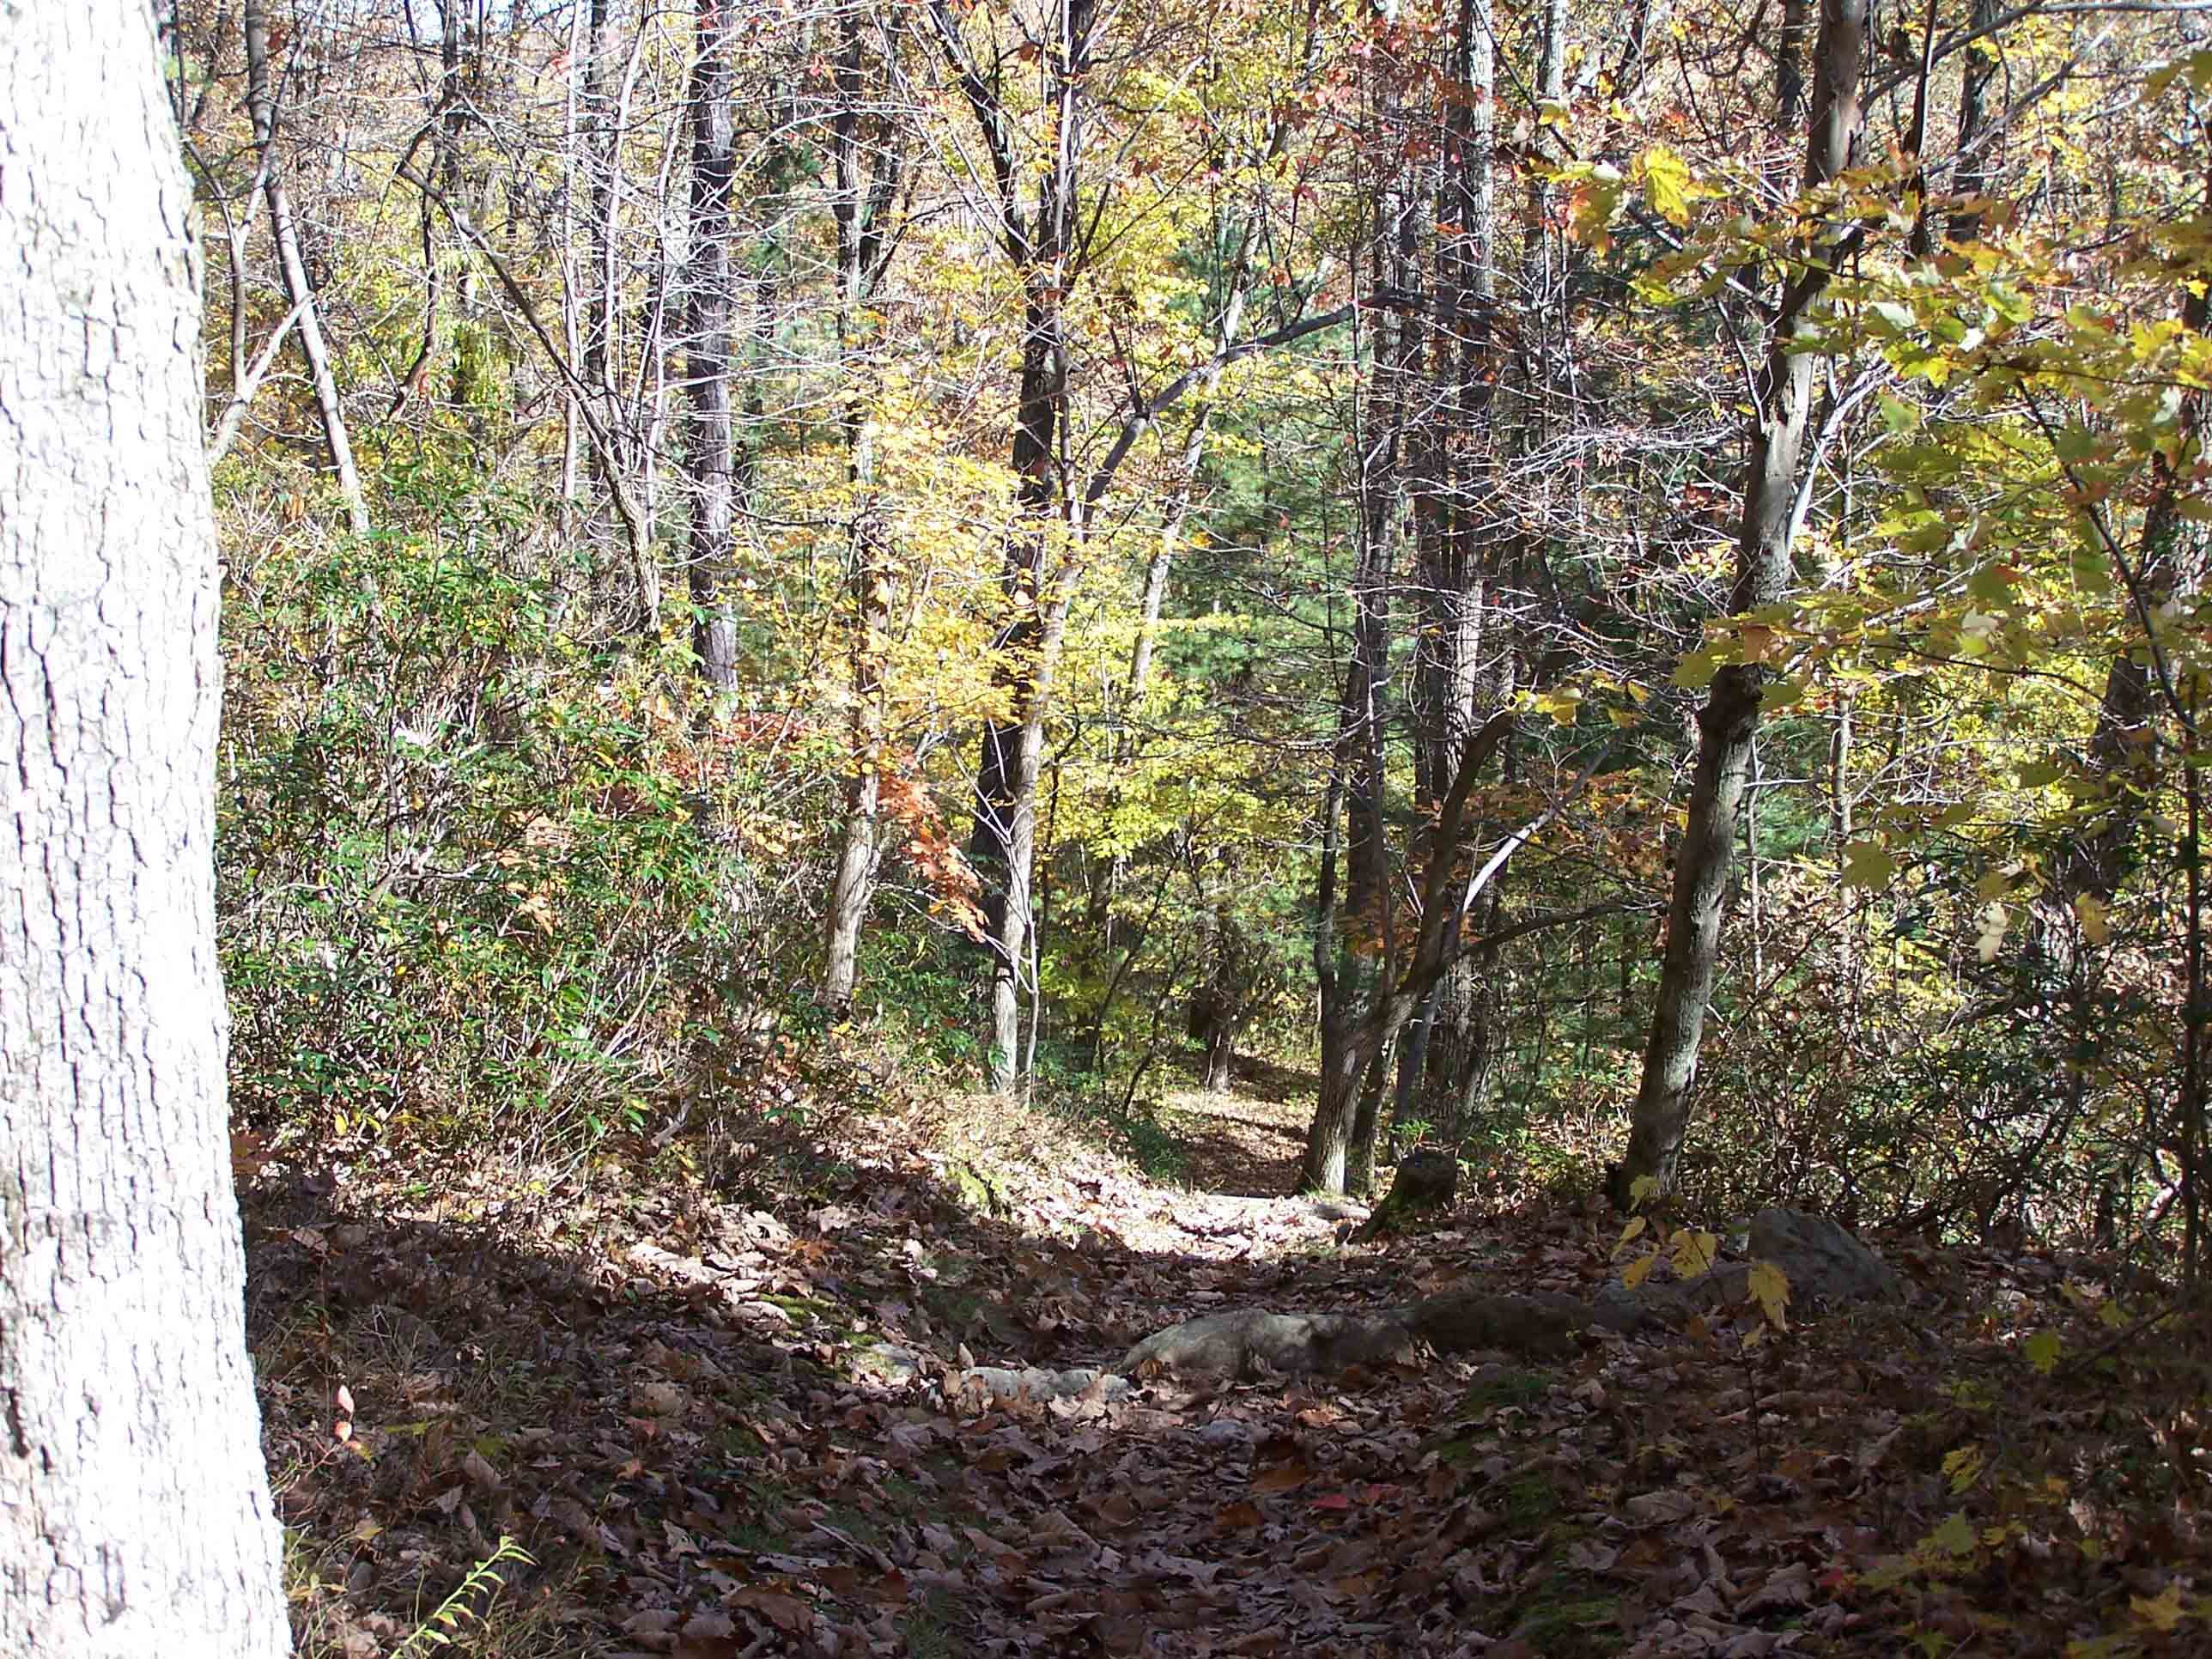 Trail between Milesburn Road (mm 12.1) and Ridge/ Canada Hollow/ Means Hollow Road Intersection (mm 12.5). Courtesy at@rohland.org